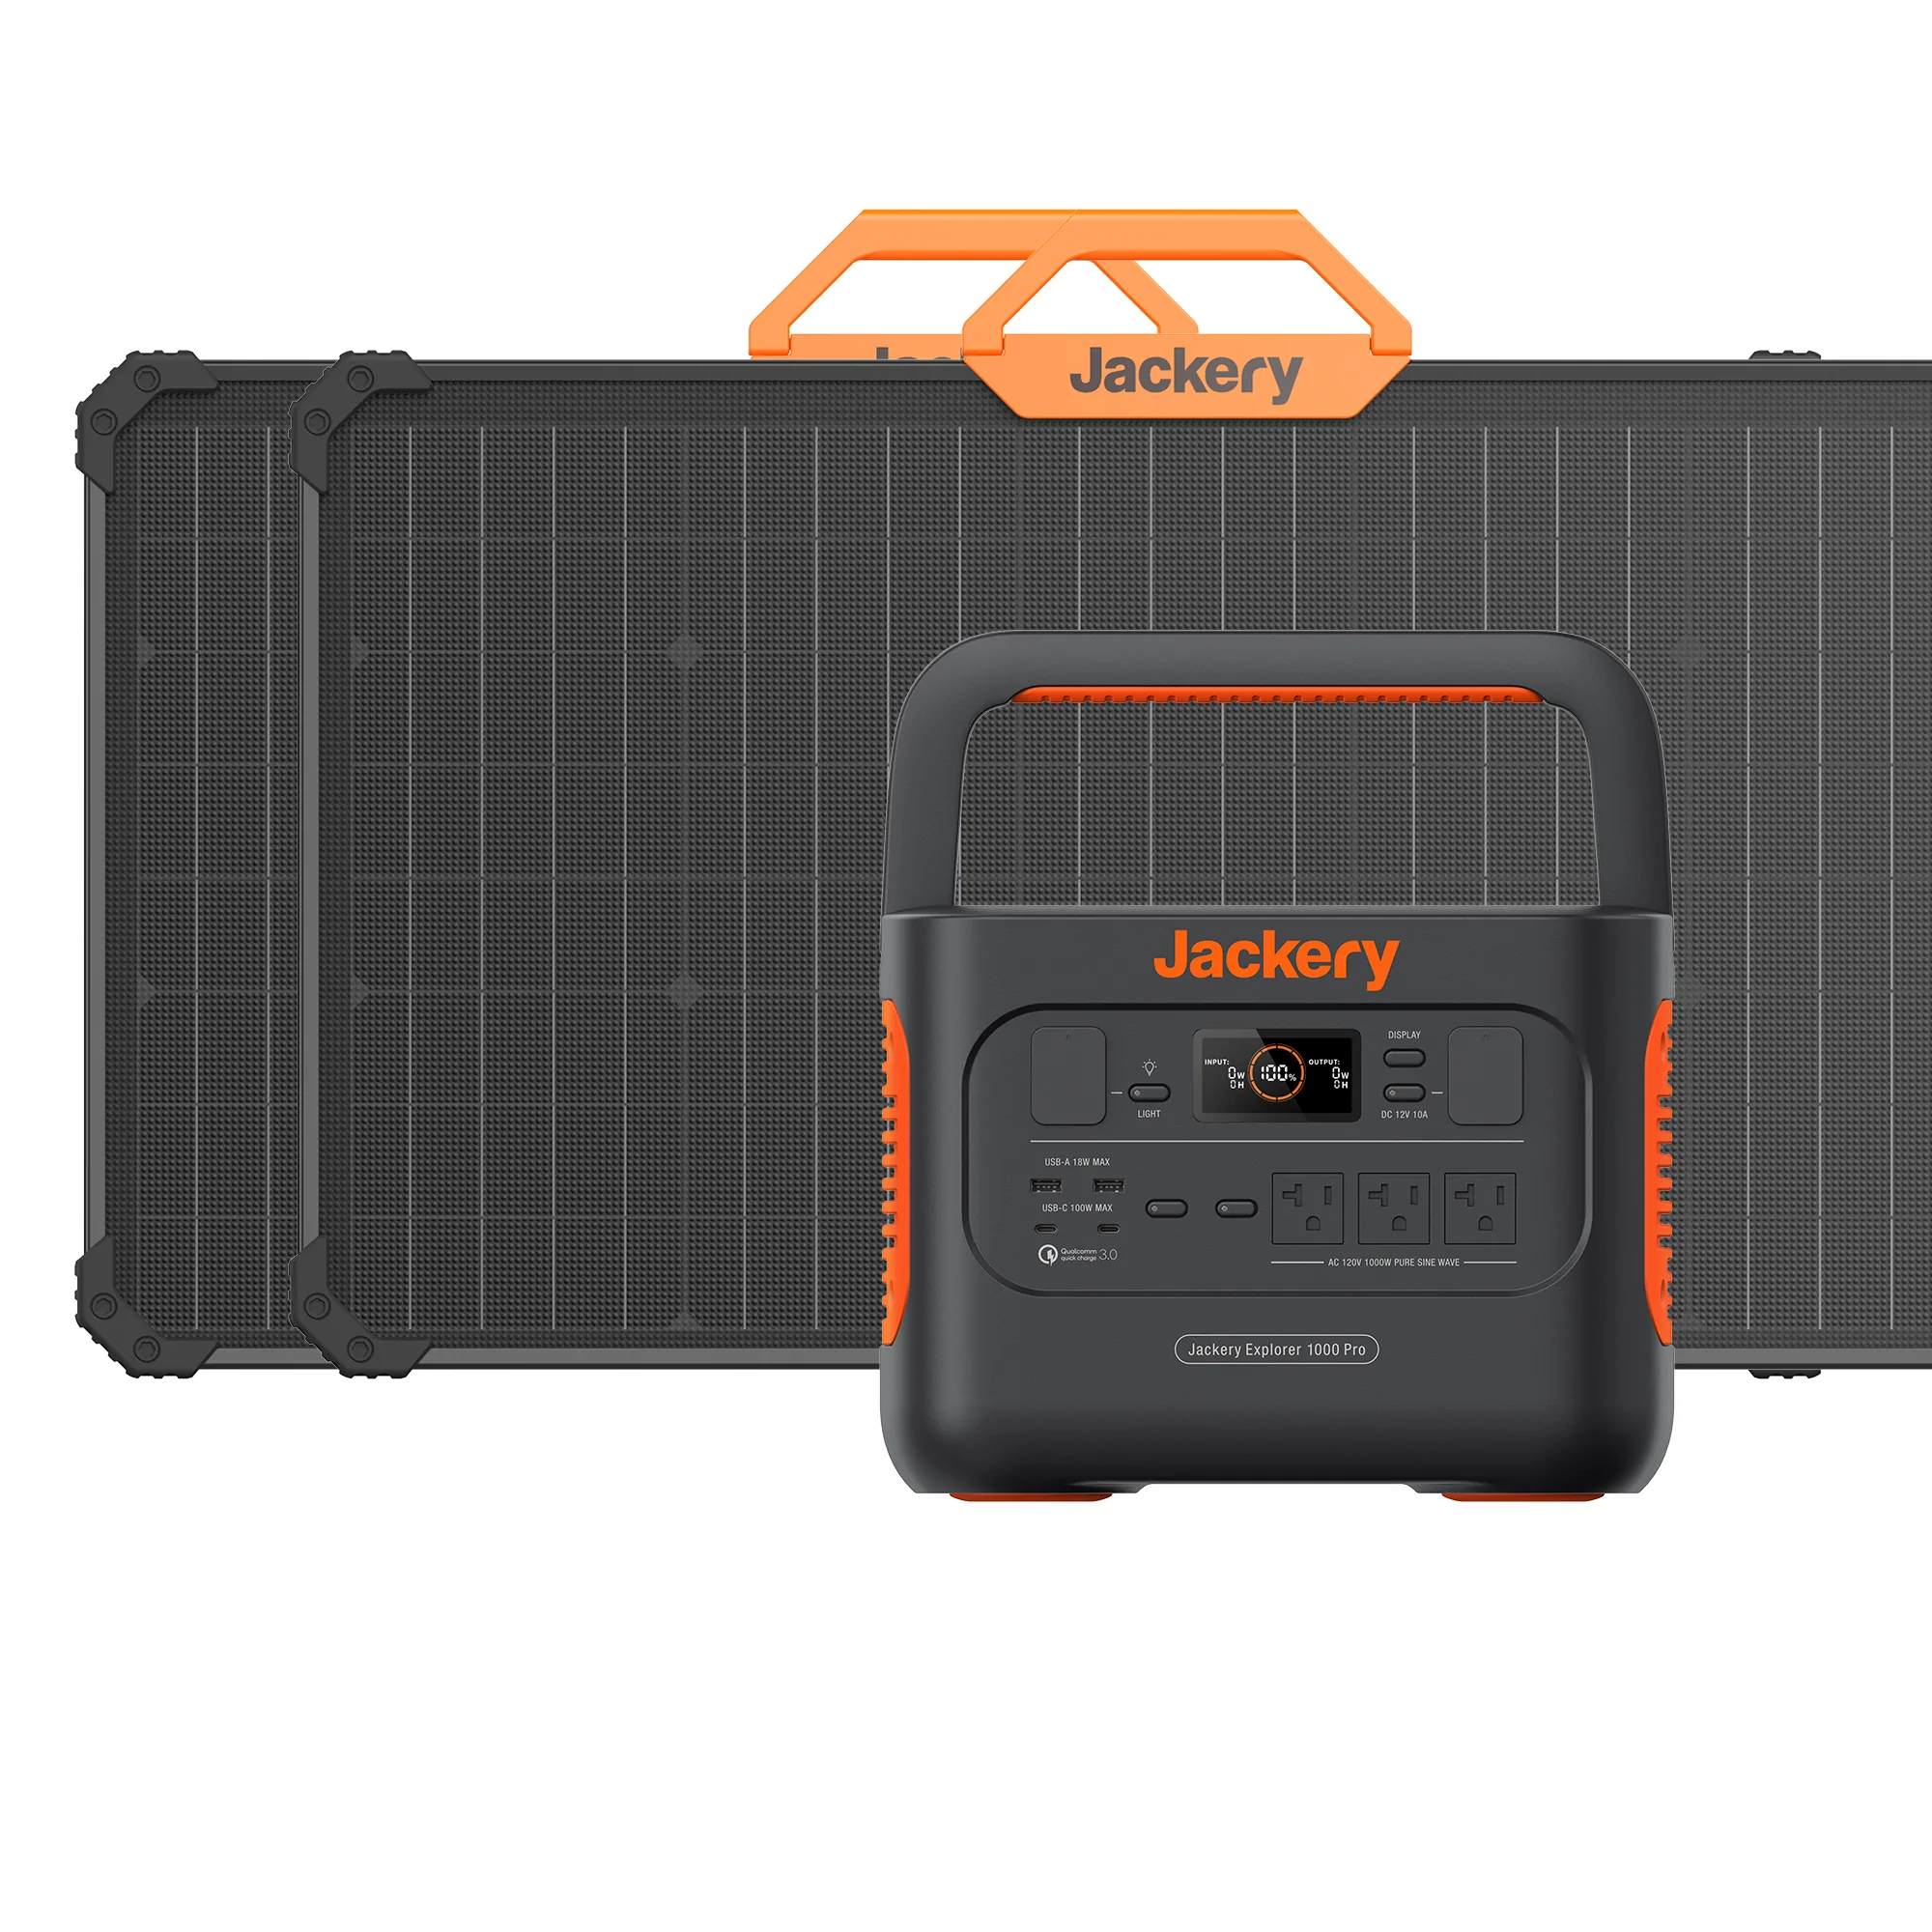 Portable Power Station Explorer 500, 518Wh Outdoor Solar Generator Mobile Lithium Battery Pack with 110V/500W AC Outlet (Solar Panel Optional) for Home Use, Emergency Backup,Road Trip Camping